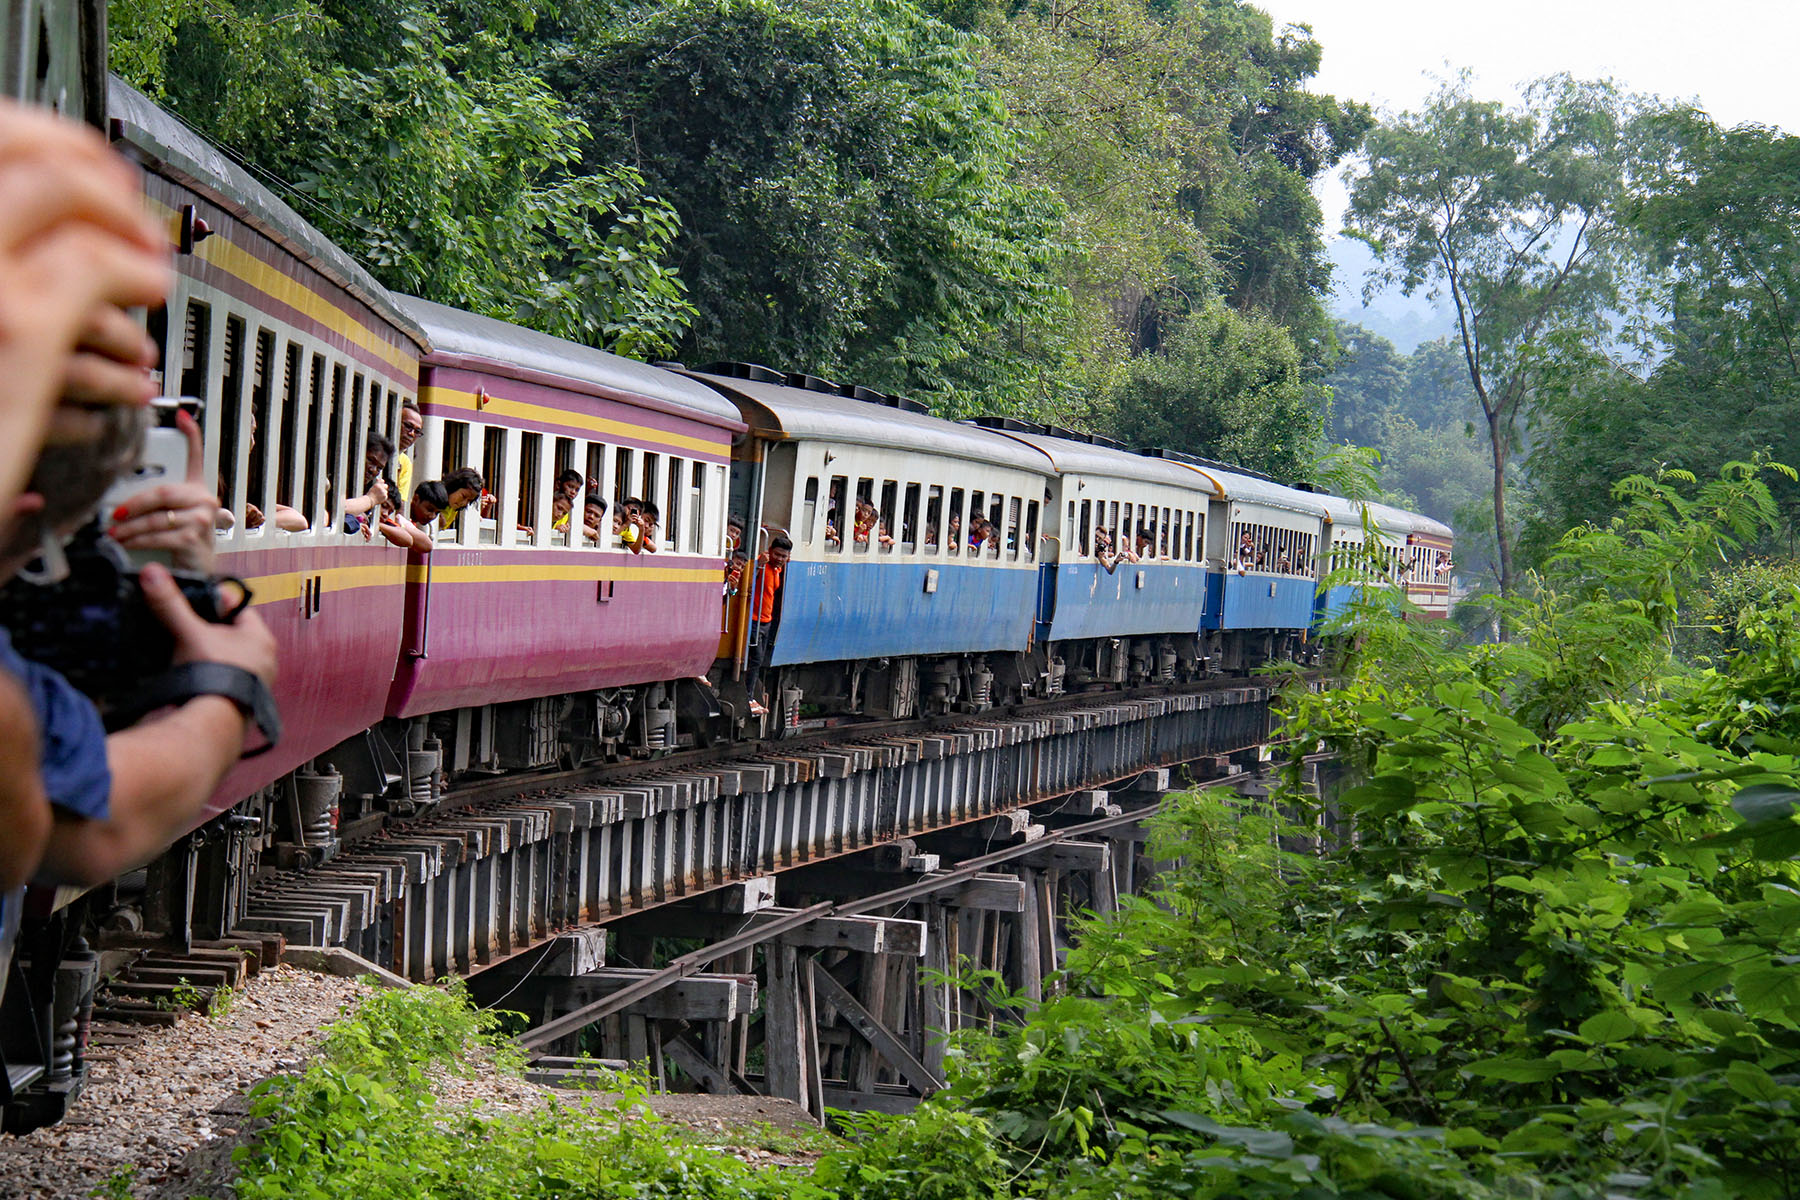 People sticking their heads out of the open windows of a train, as it is driving on a bridge surrounded by trees.